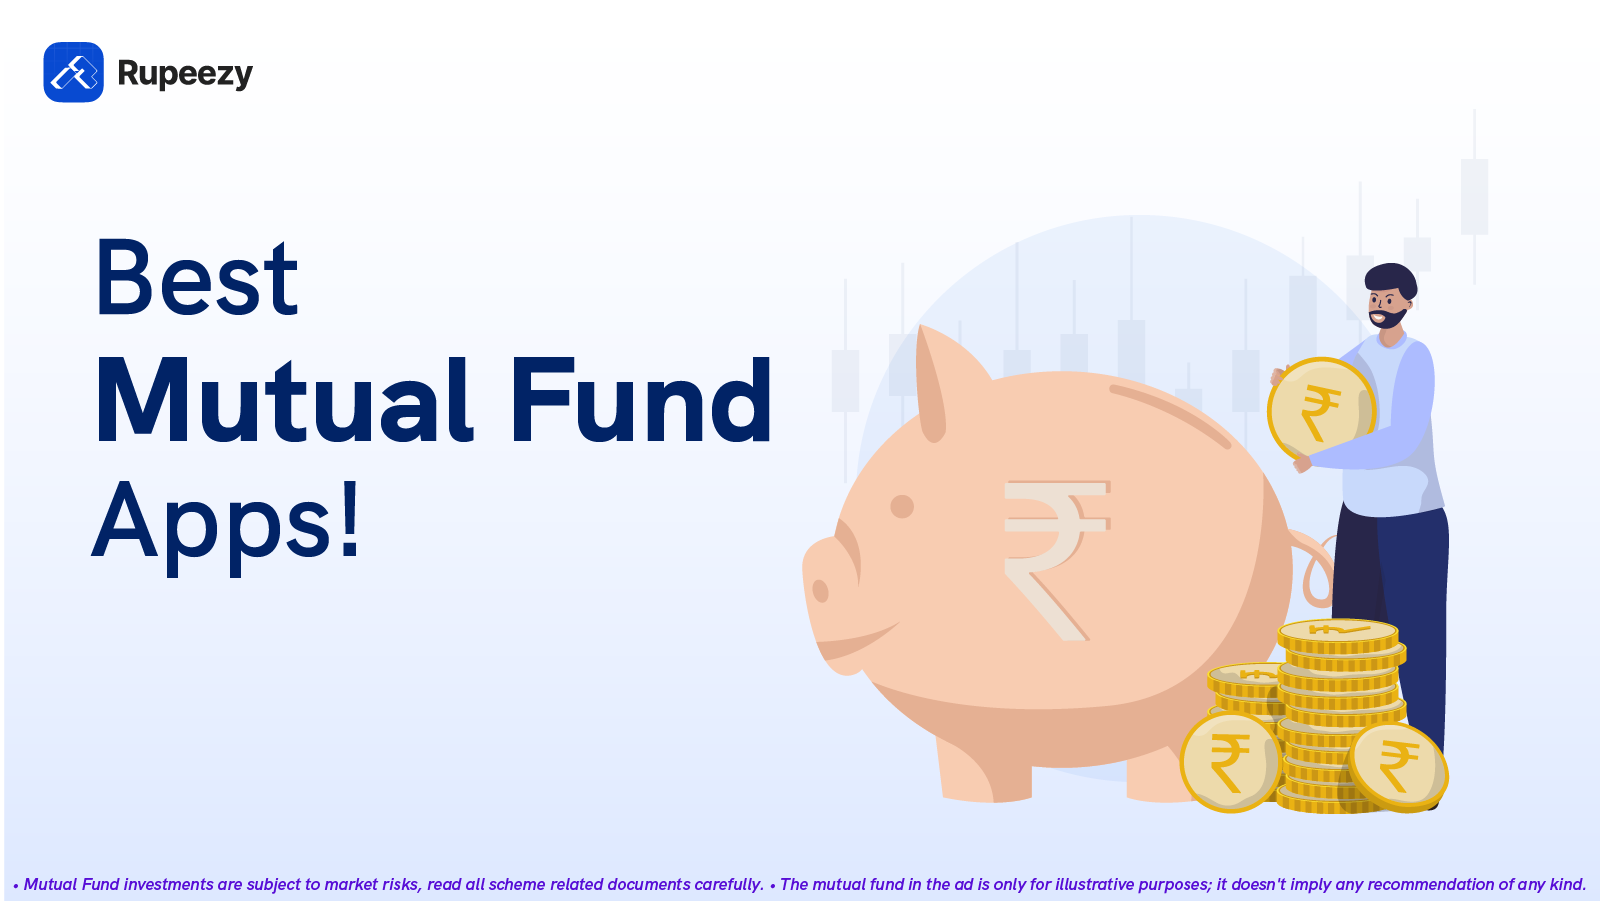 Best mutual fund apps